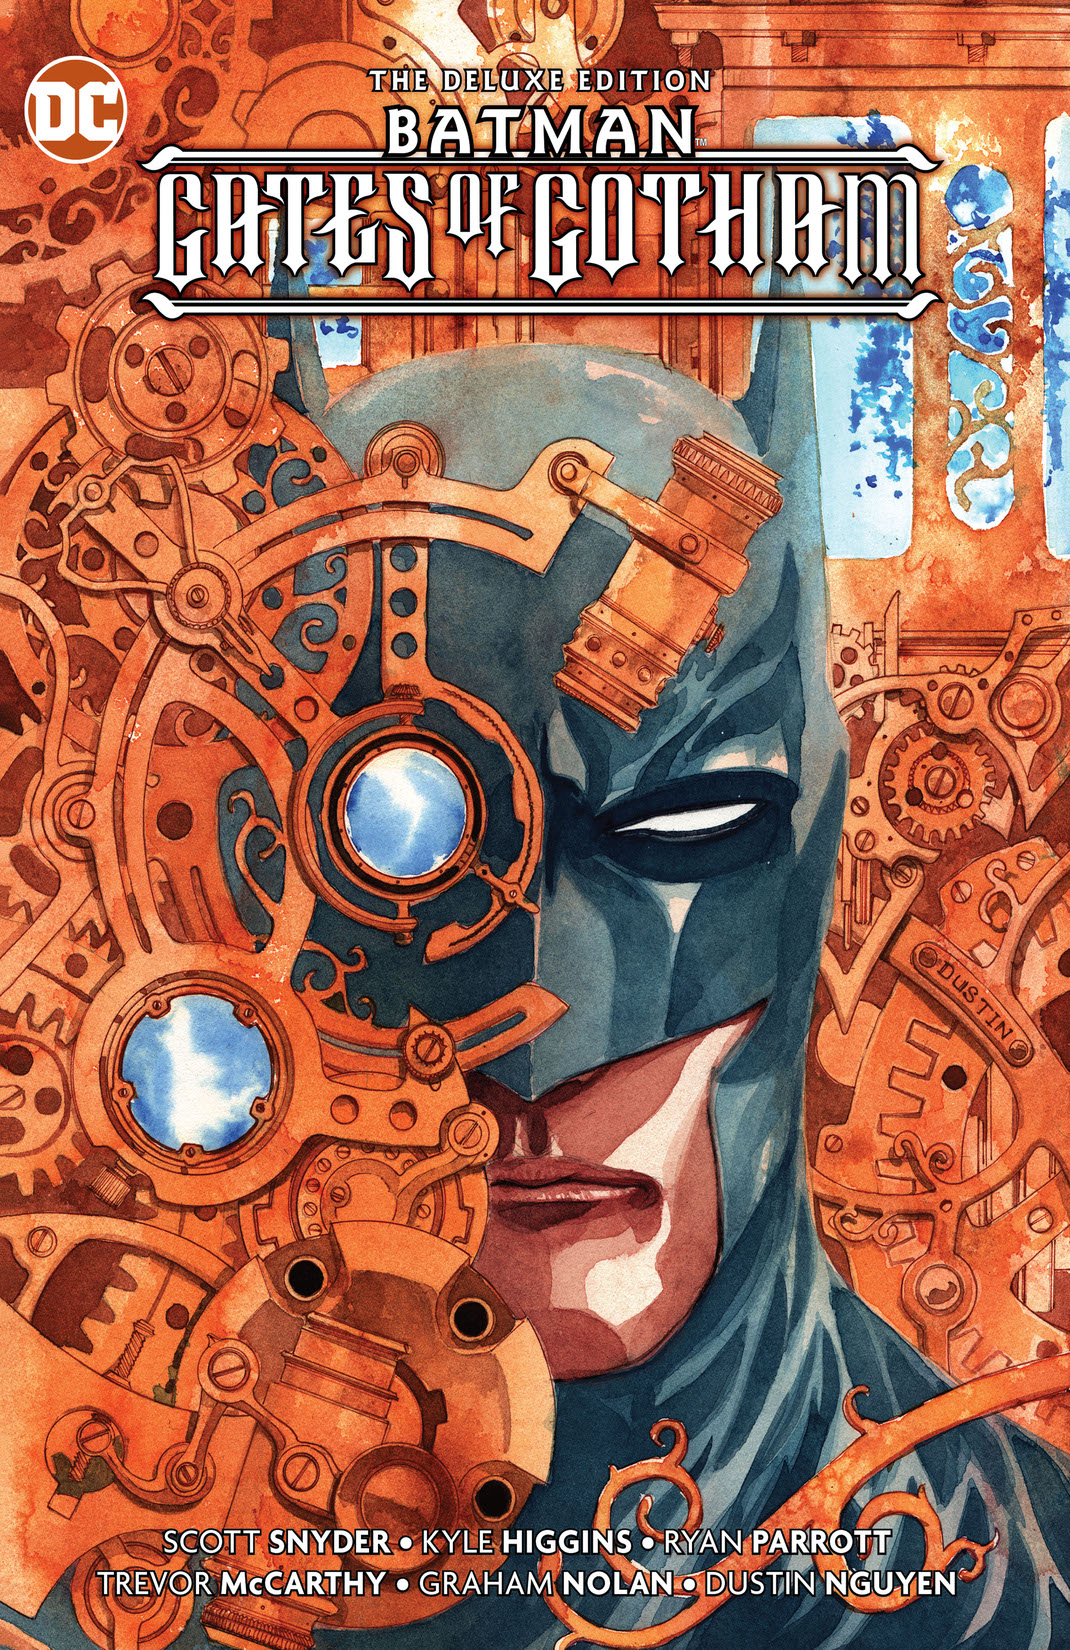 Batman: Gates of Gotham Deluxe Edition preview images